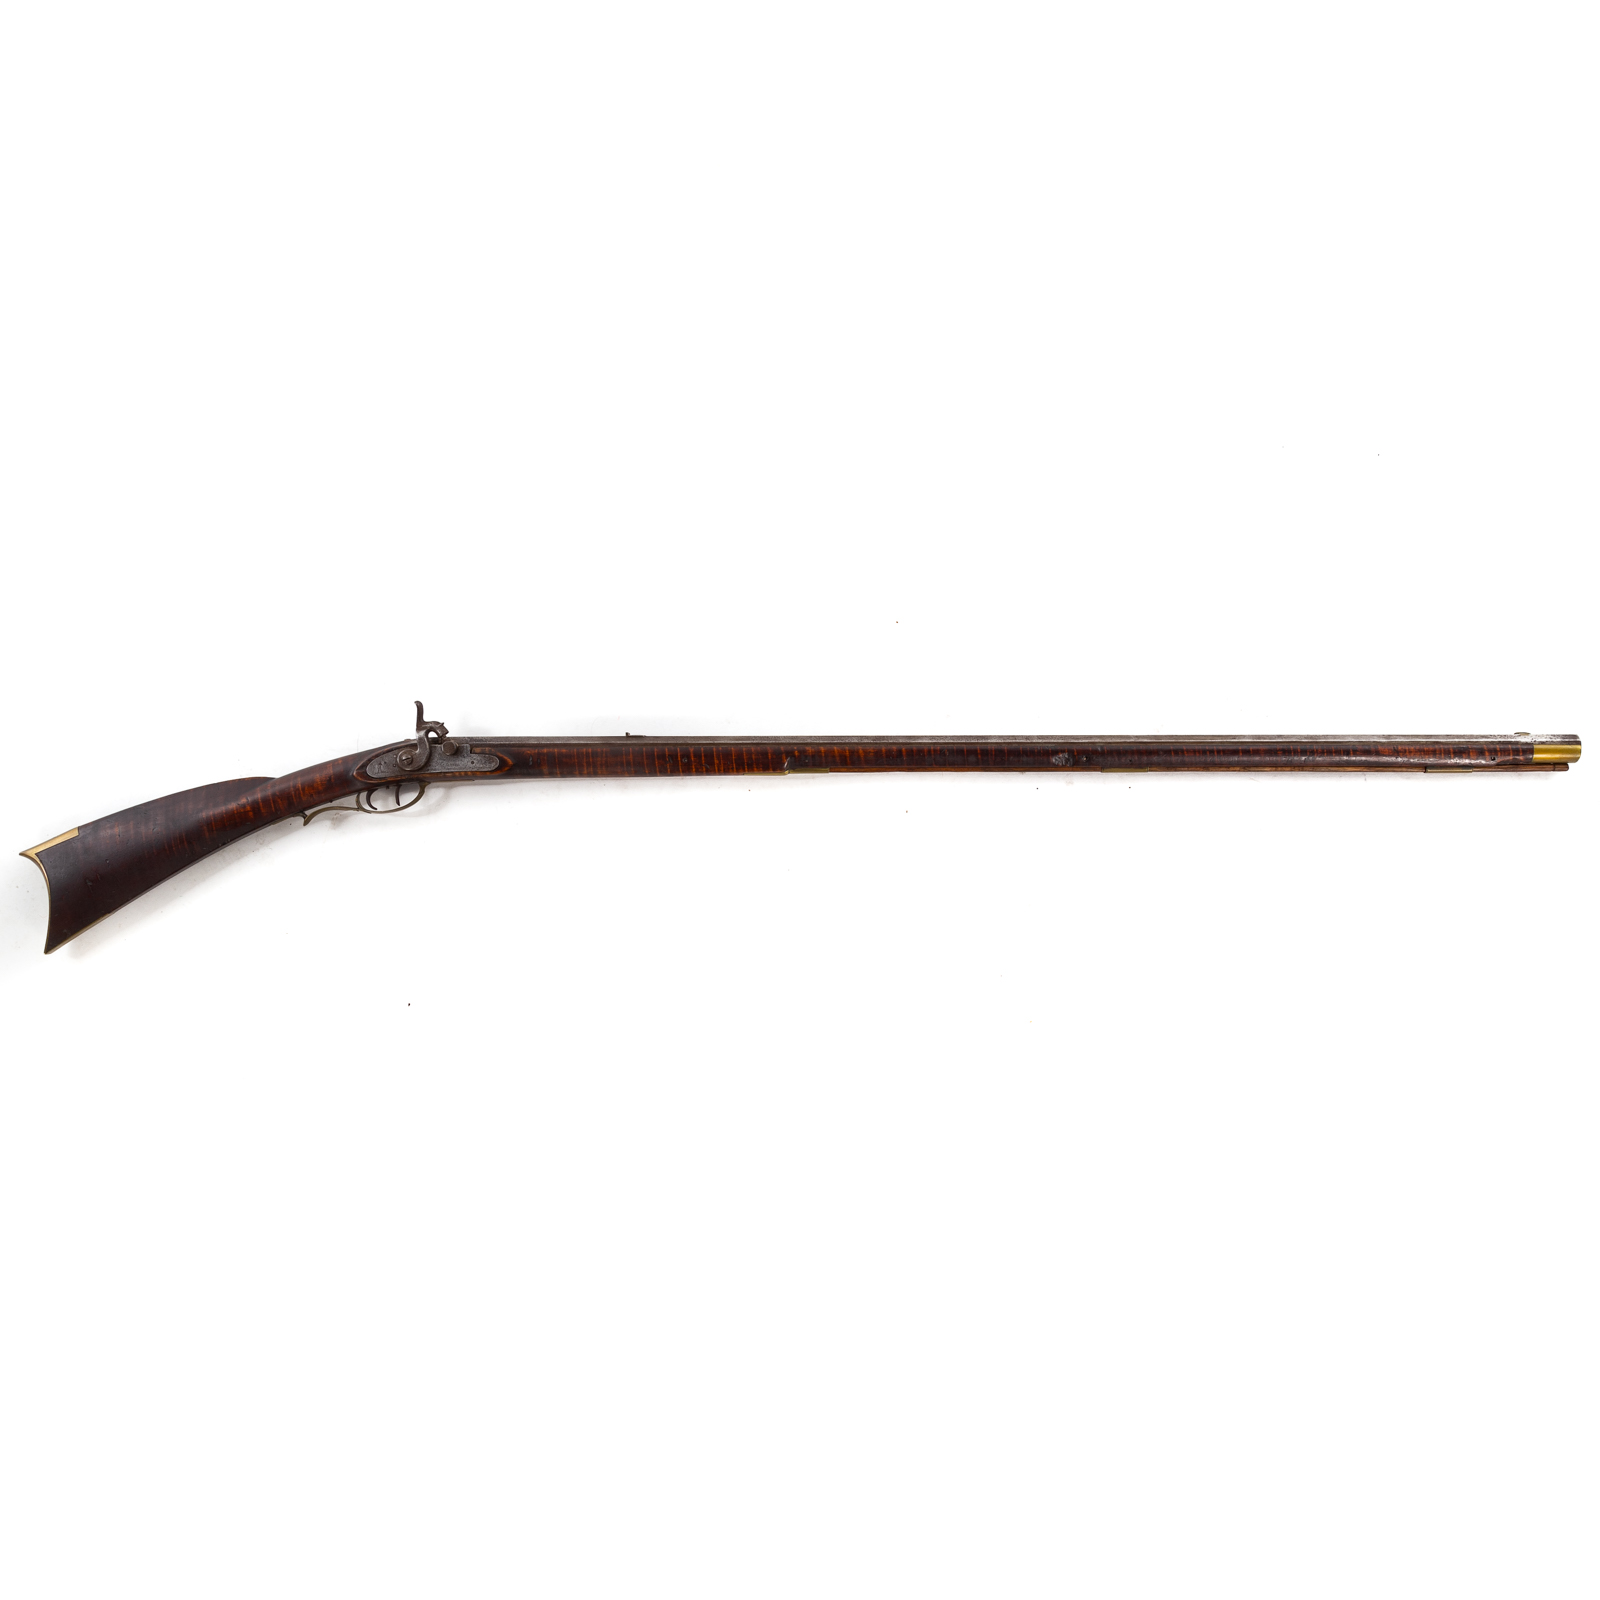 AN AMERICAN PERCUSSION LONG RIFLE